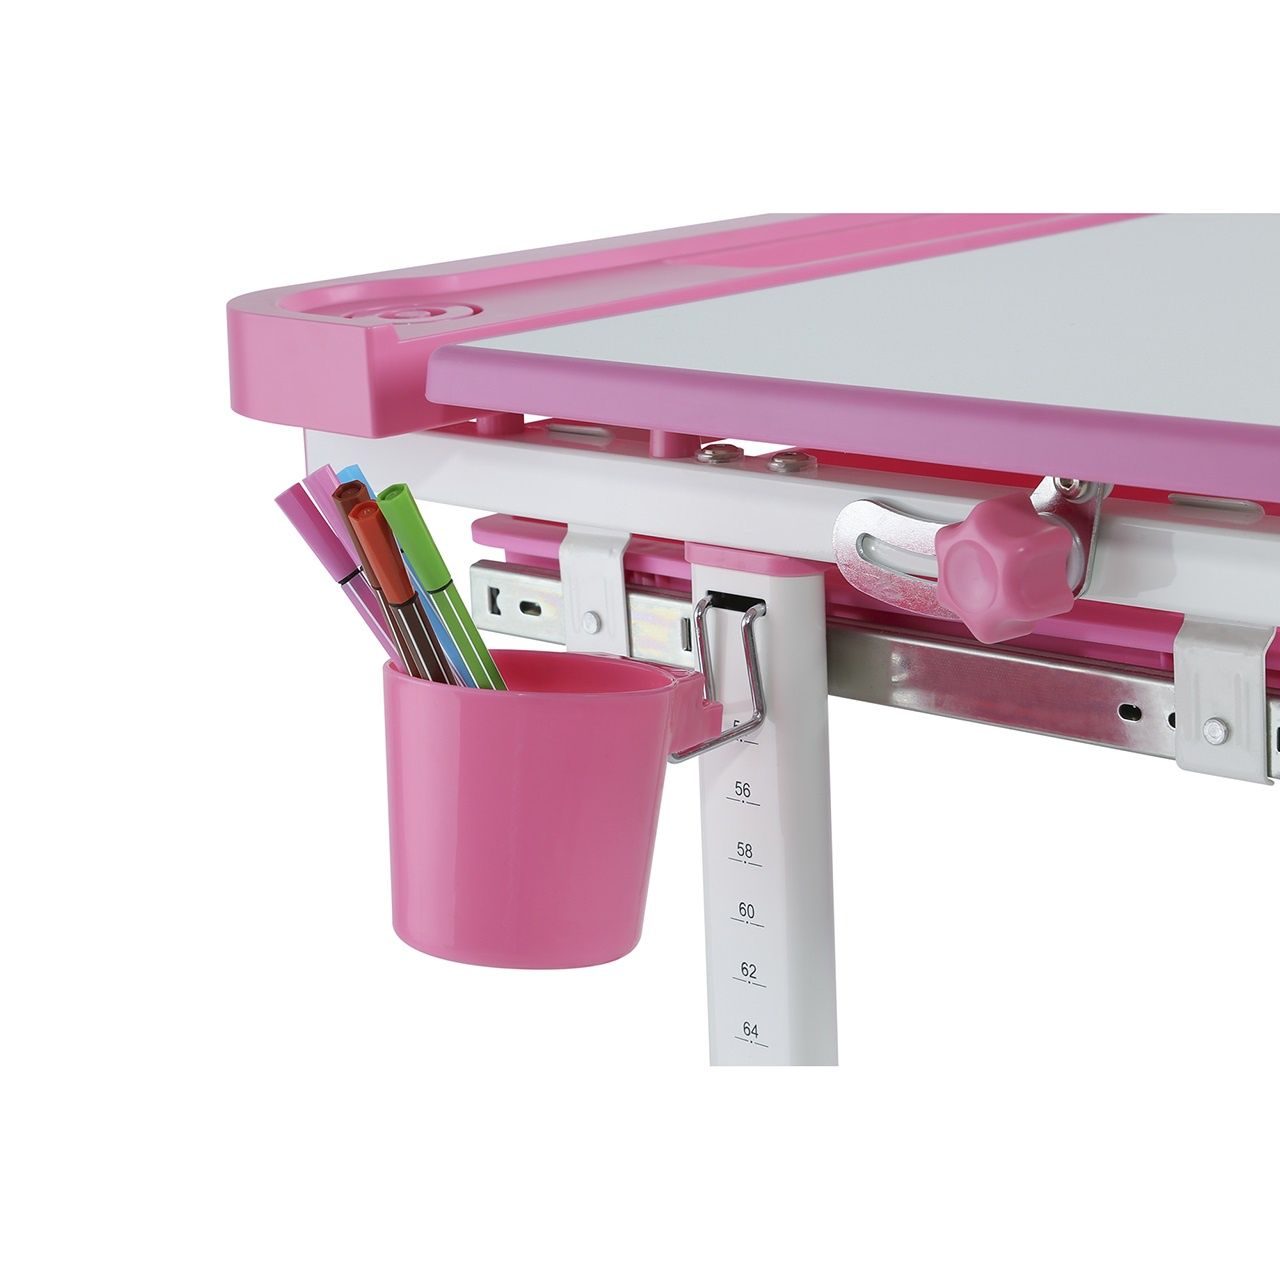    FunDesk Cantare Pink, 515721, , 